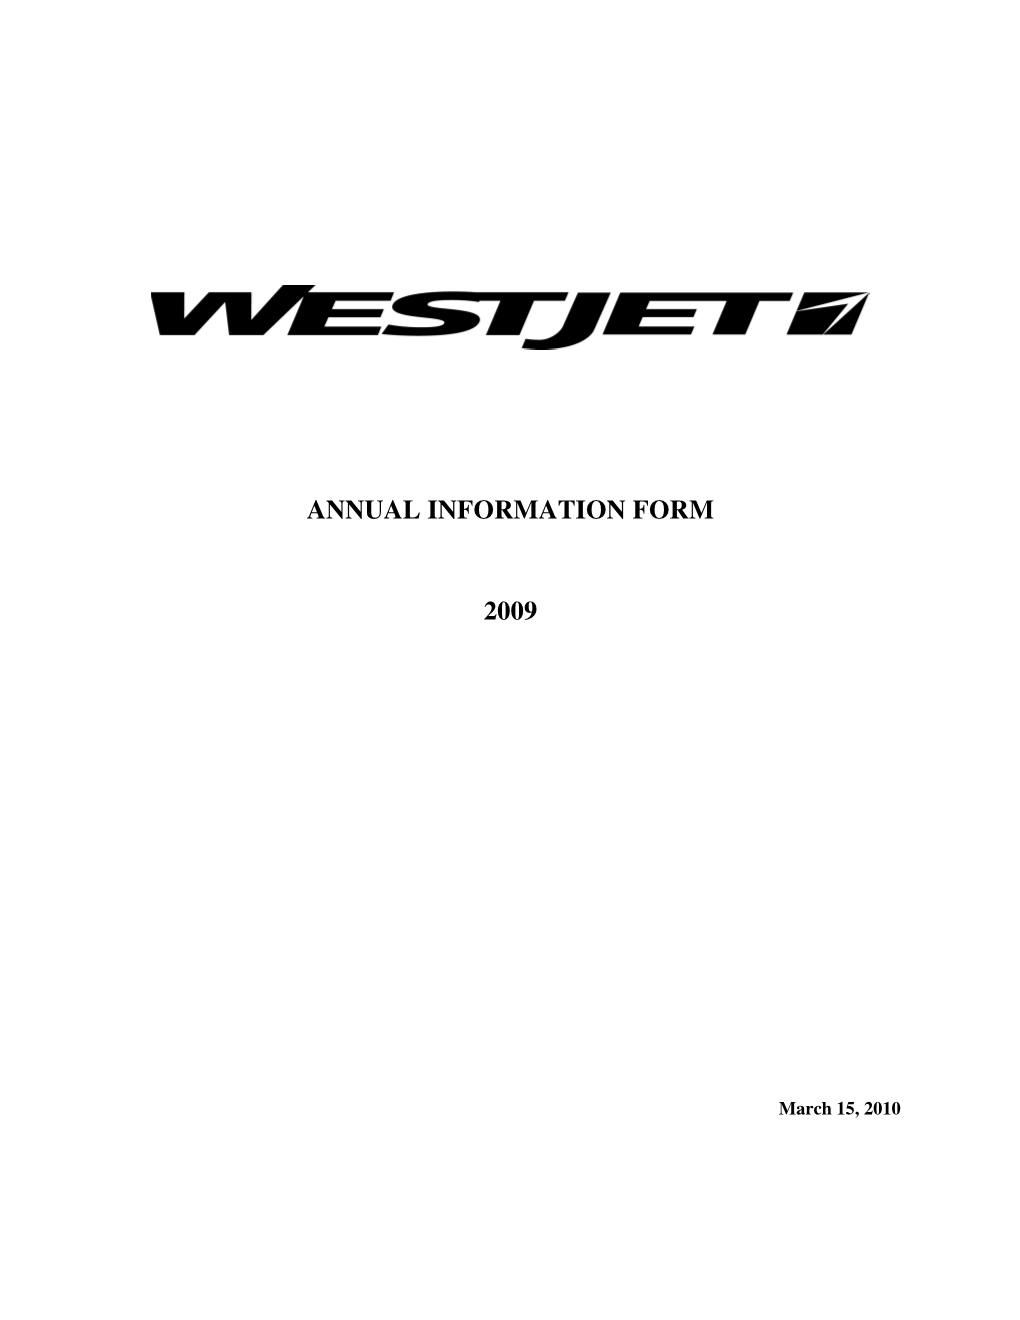 Annual Information Form 2009